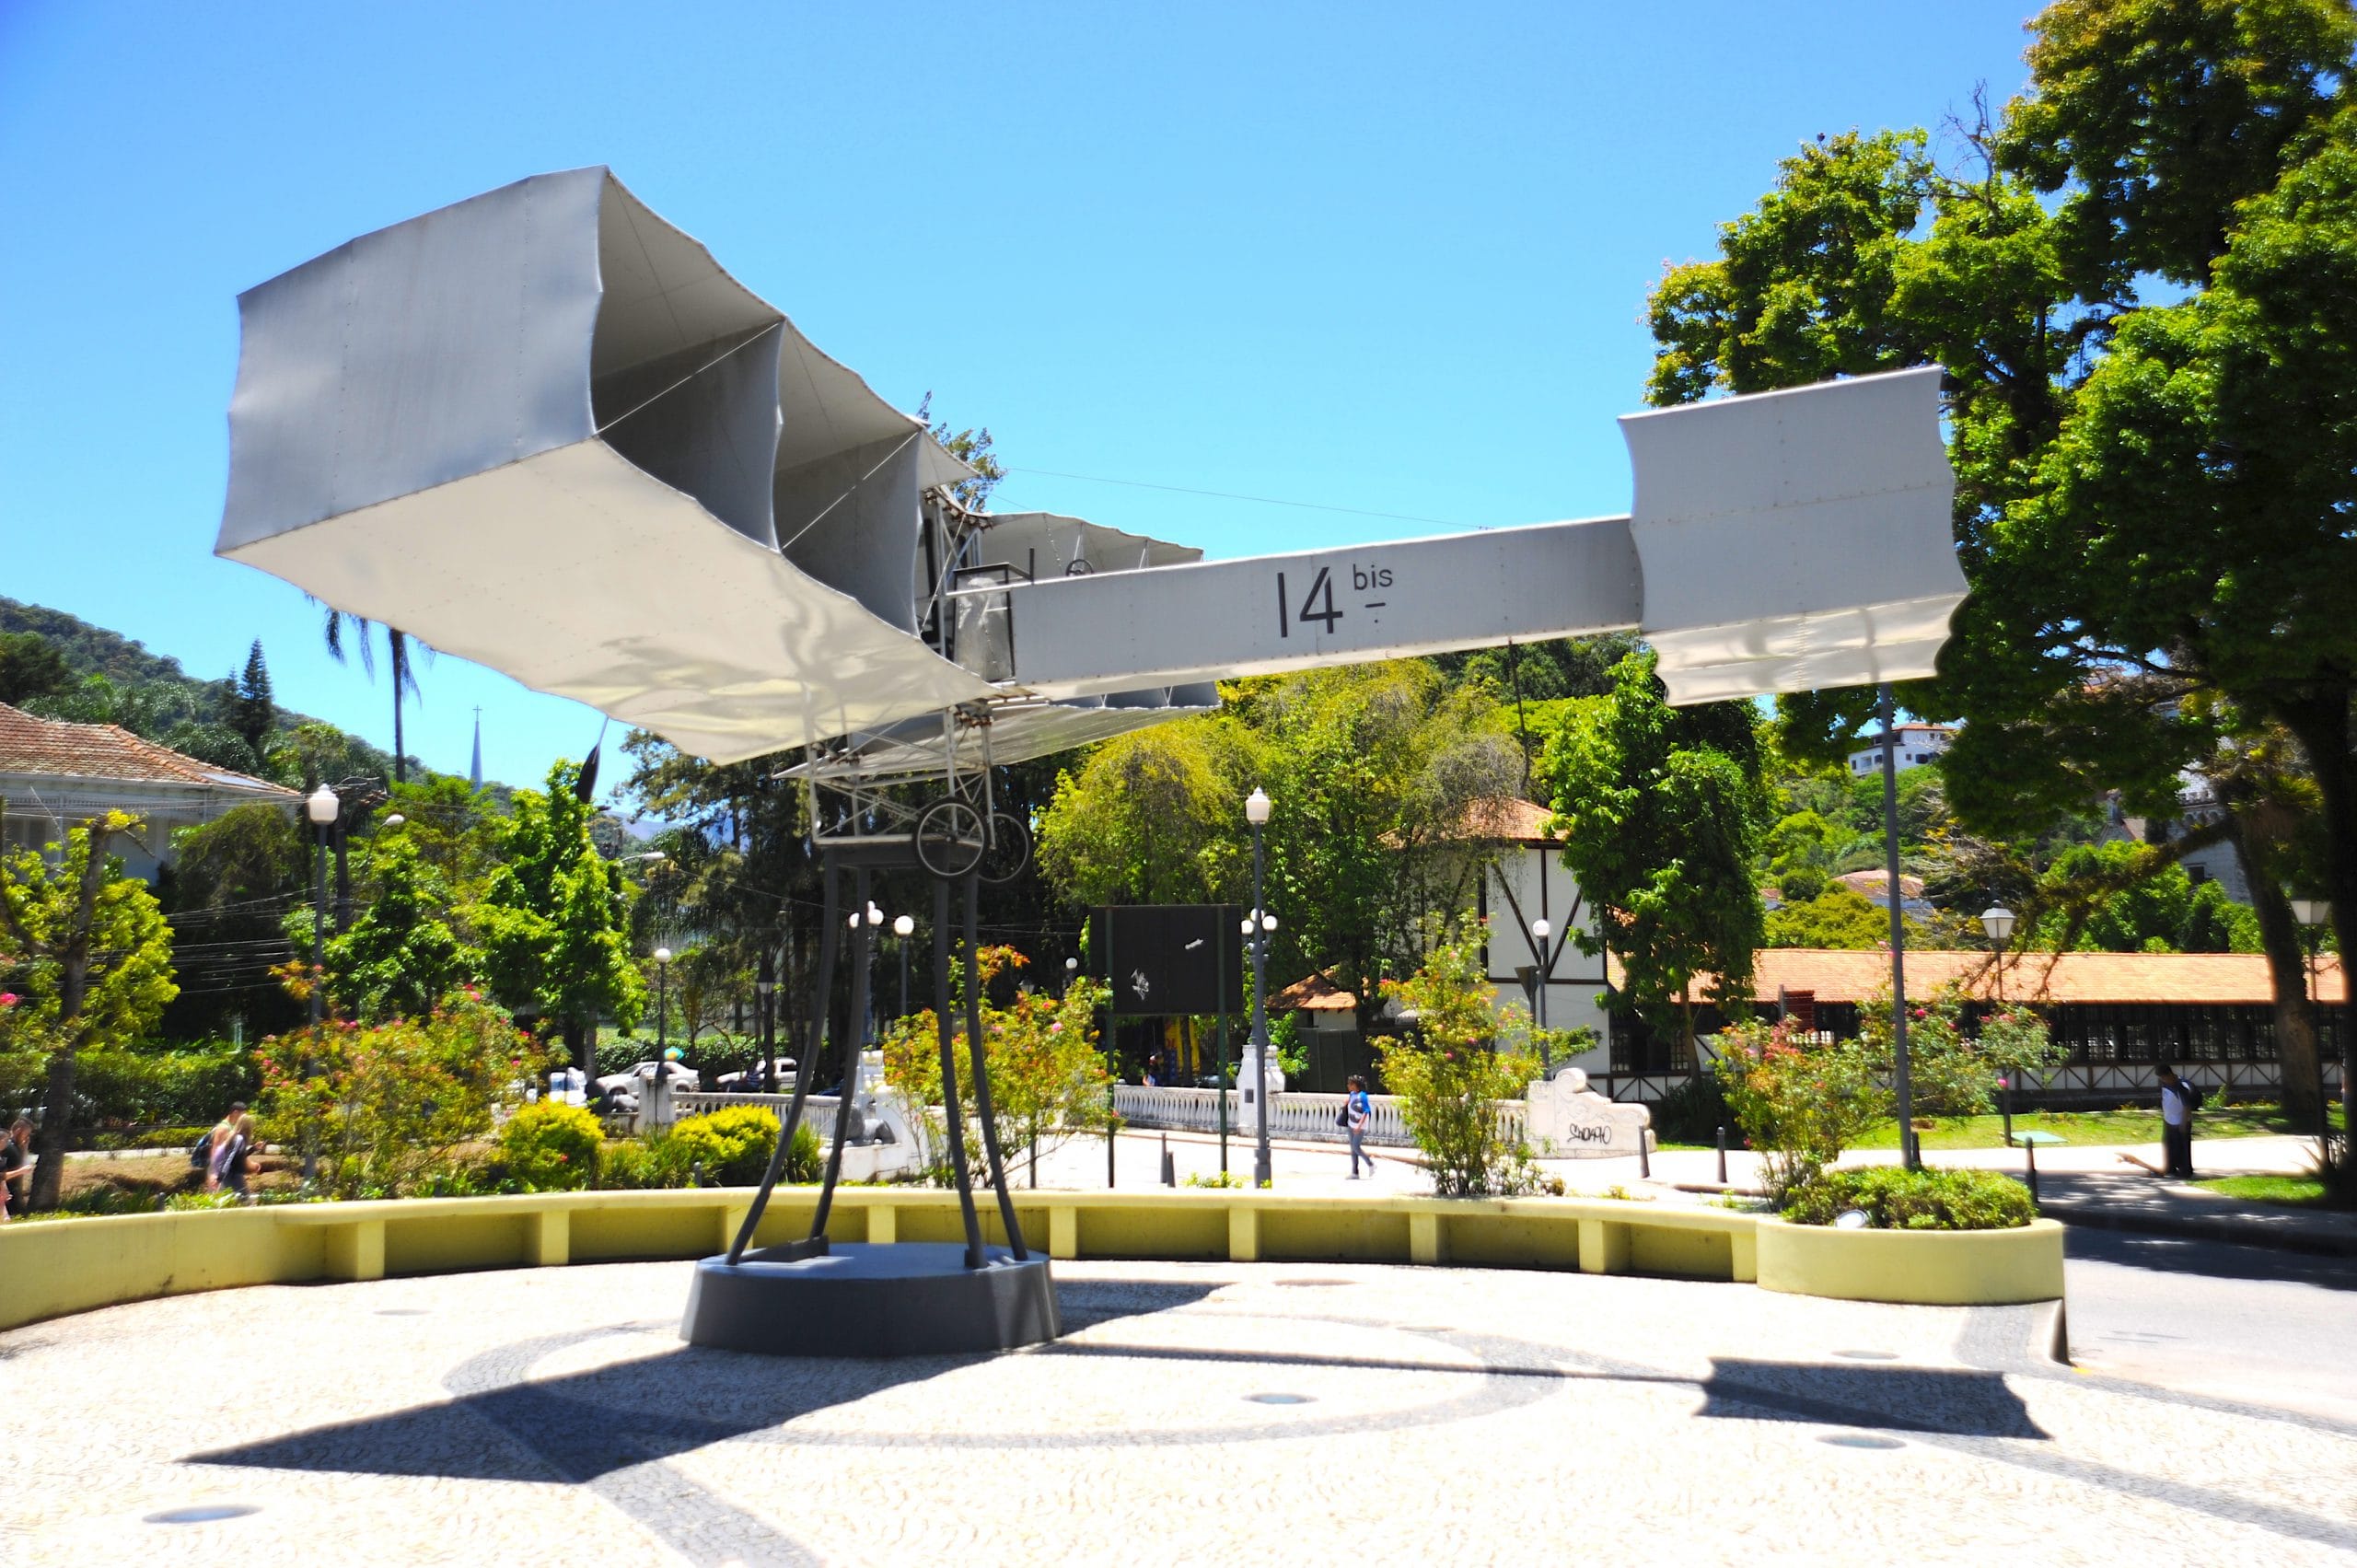 airplane built by Santos Dumont, displayed outside Rio.